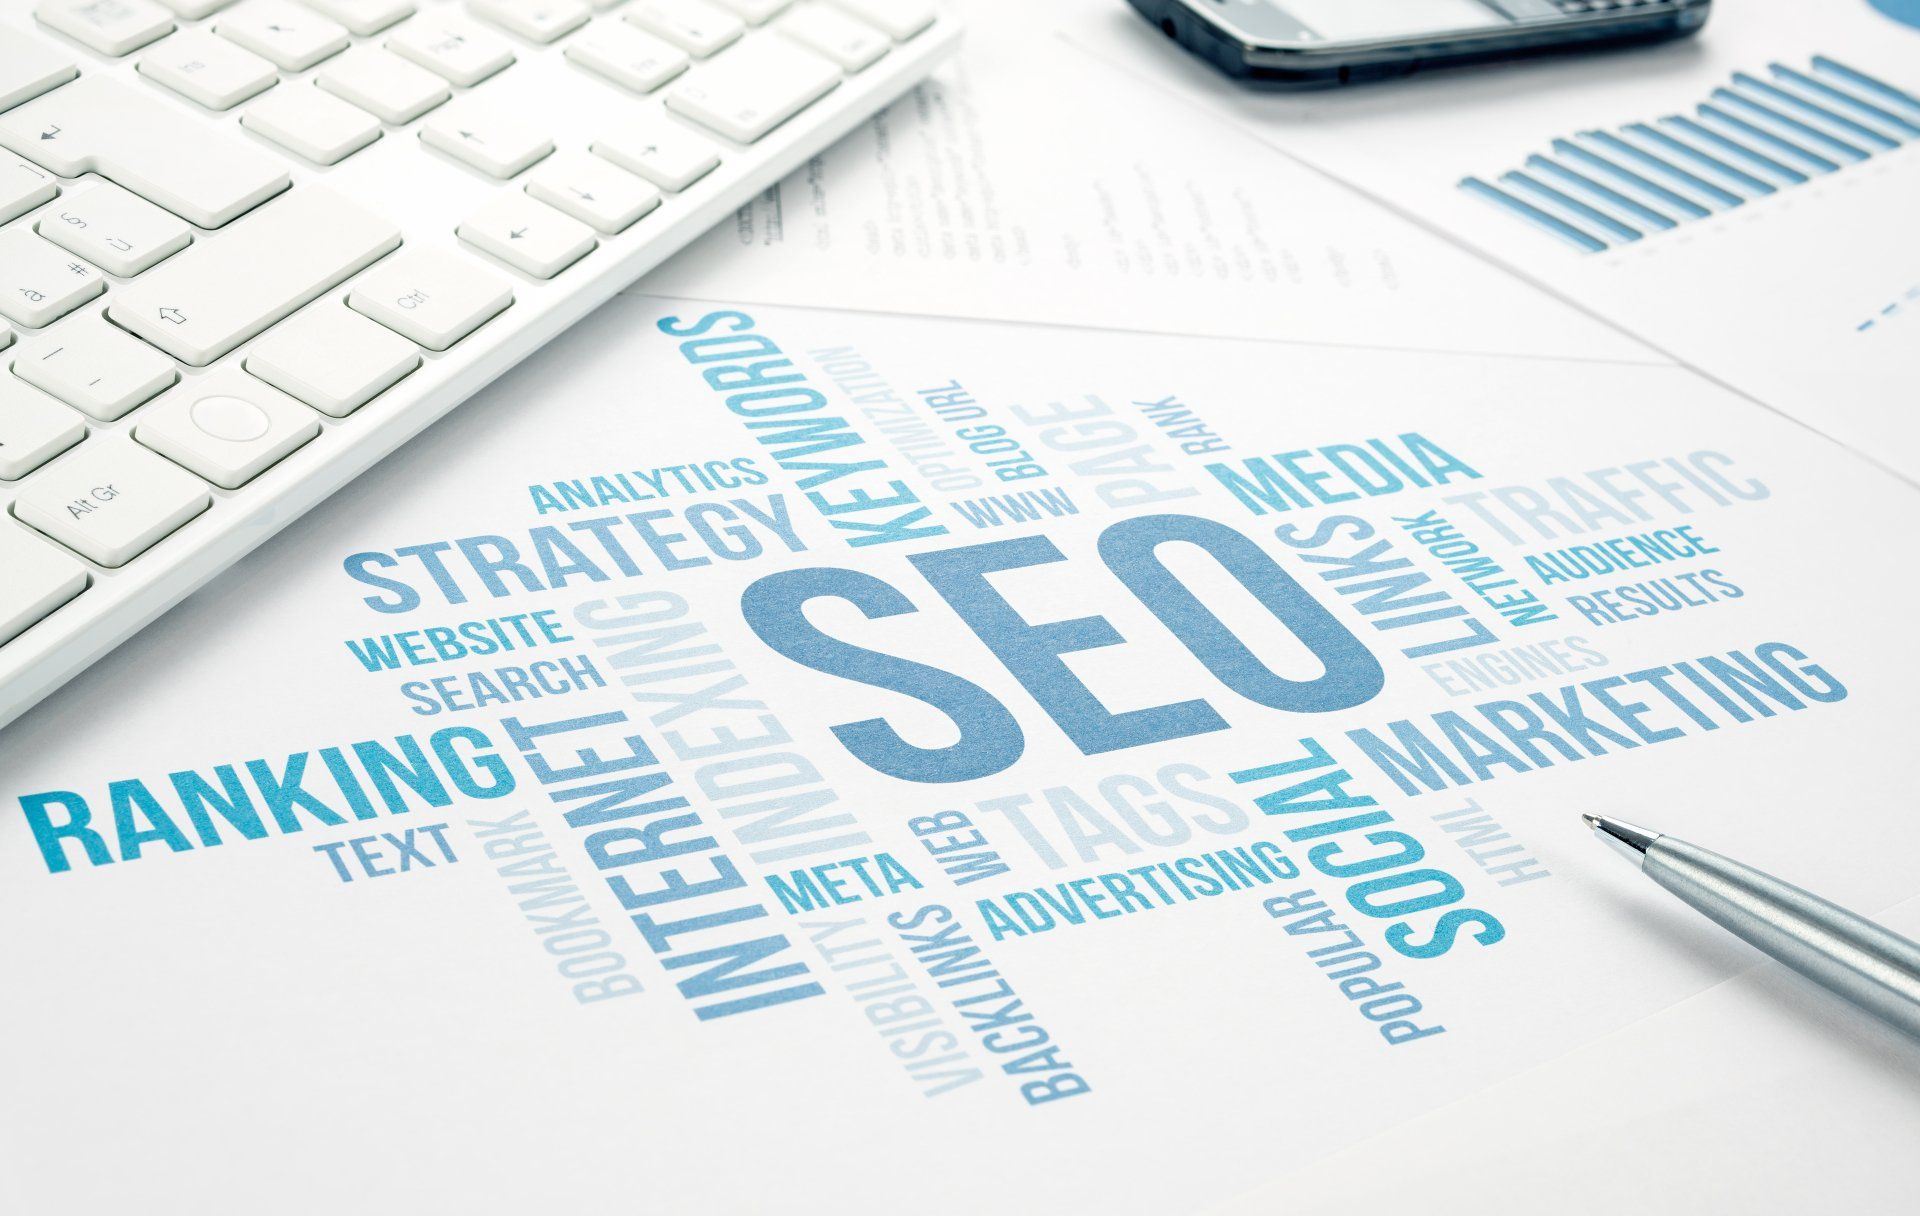 SEO in 2021 importance